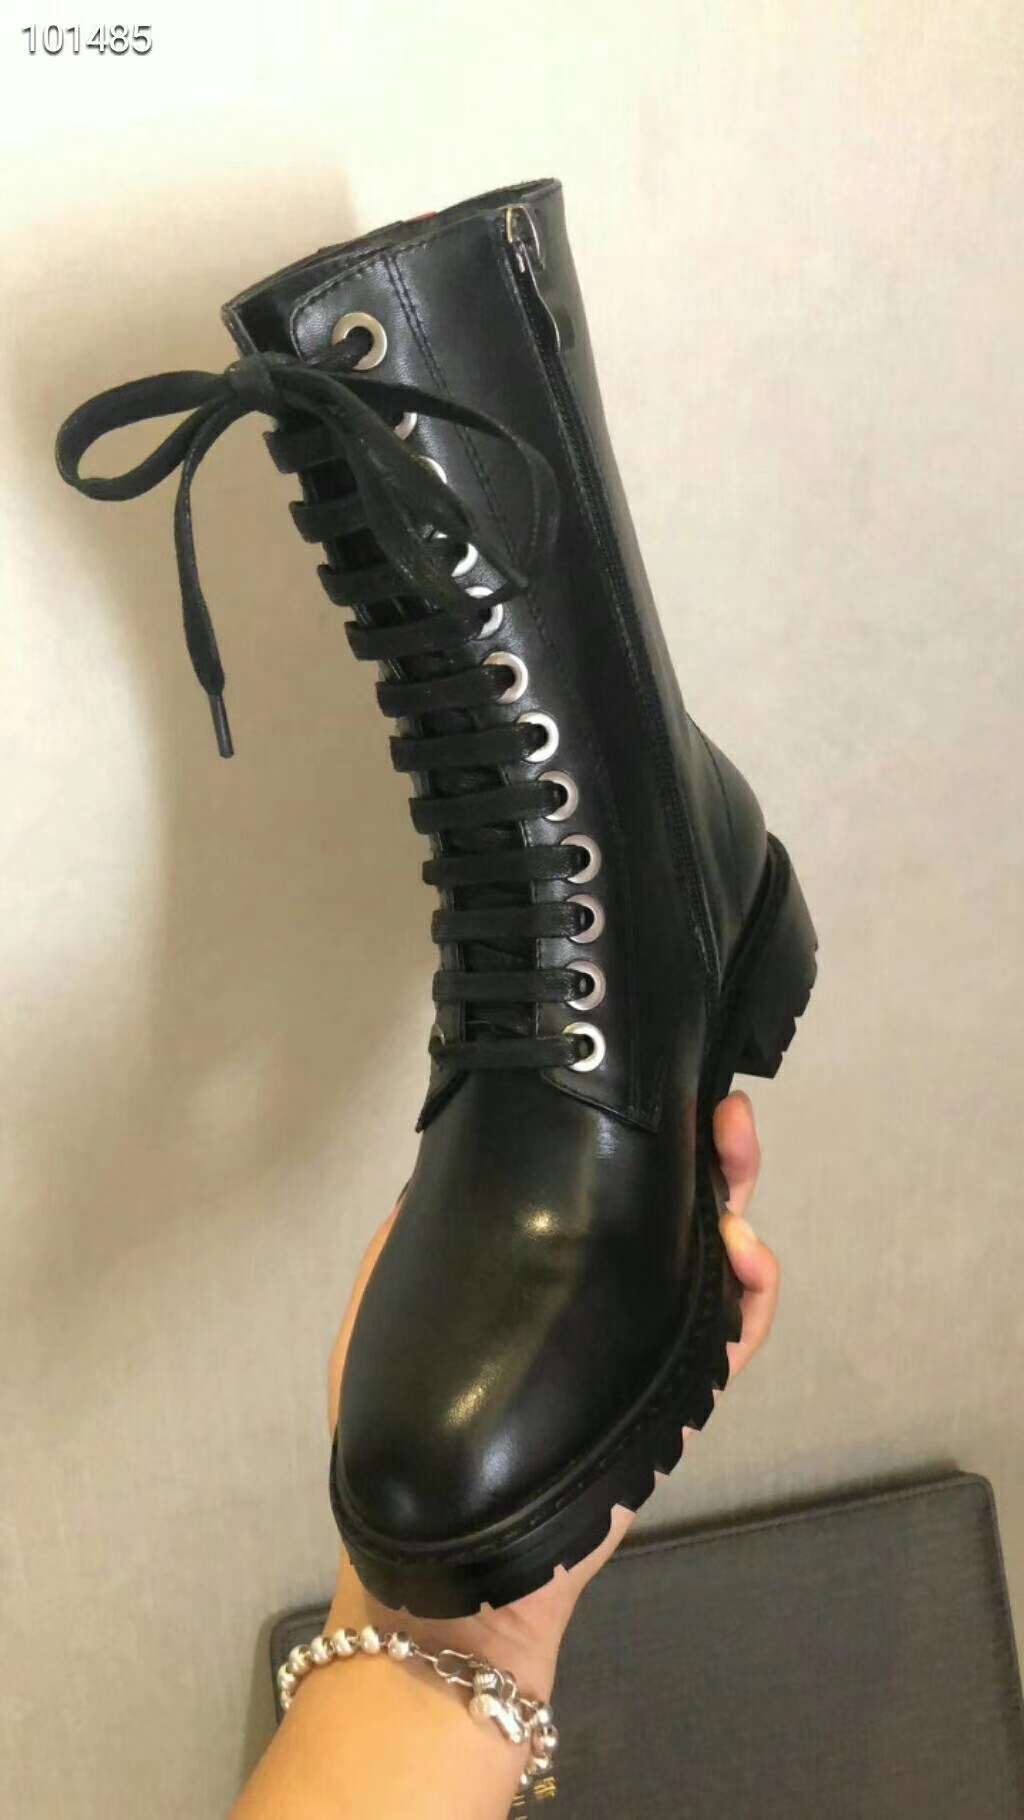 2019 NEW Chanel Real leather shoes CHANEL 101485 BLACK - Click Image to Close